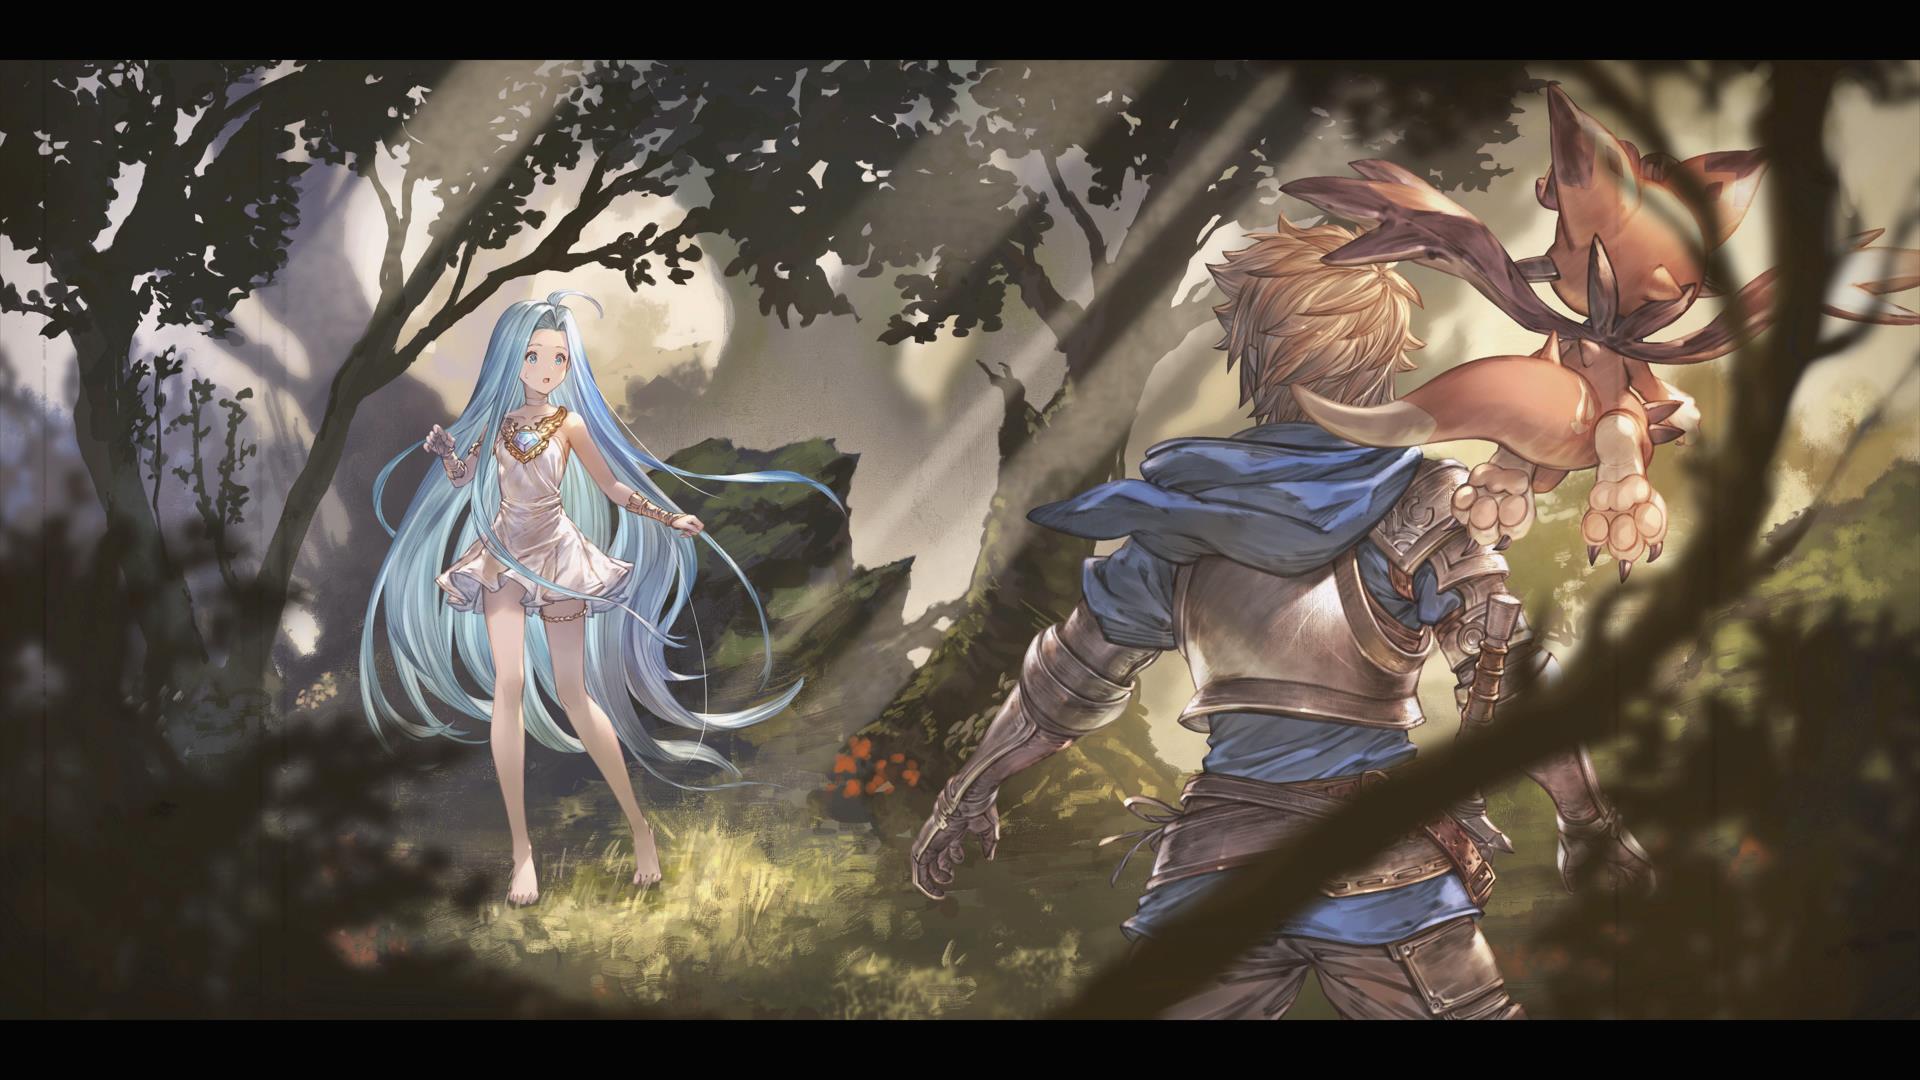 Review: 'Granblue Fantasy: Versus' benefits from RPG touch